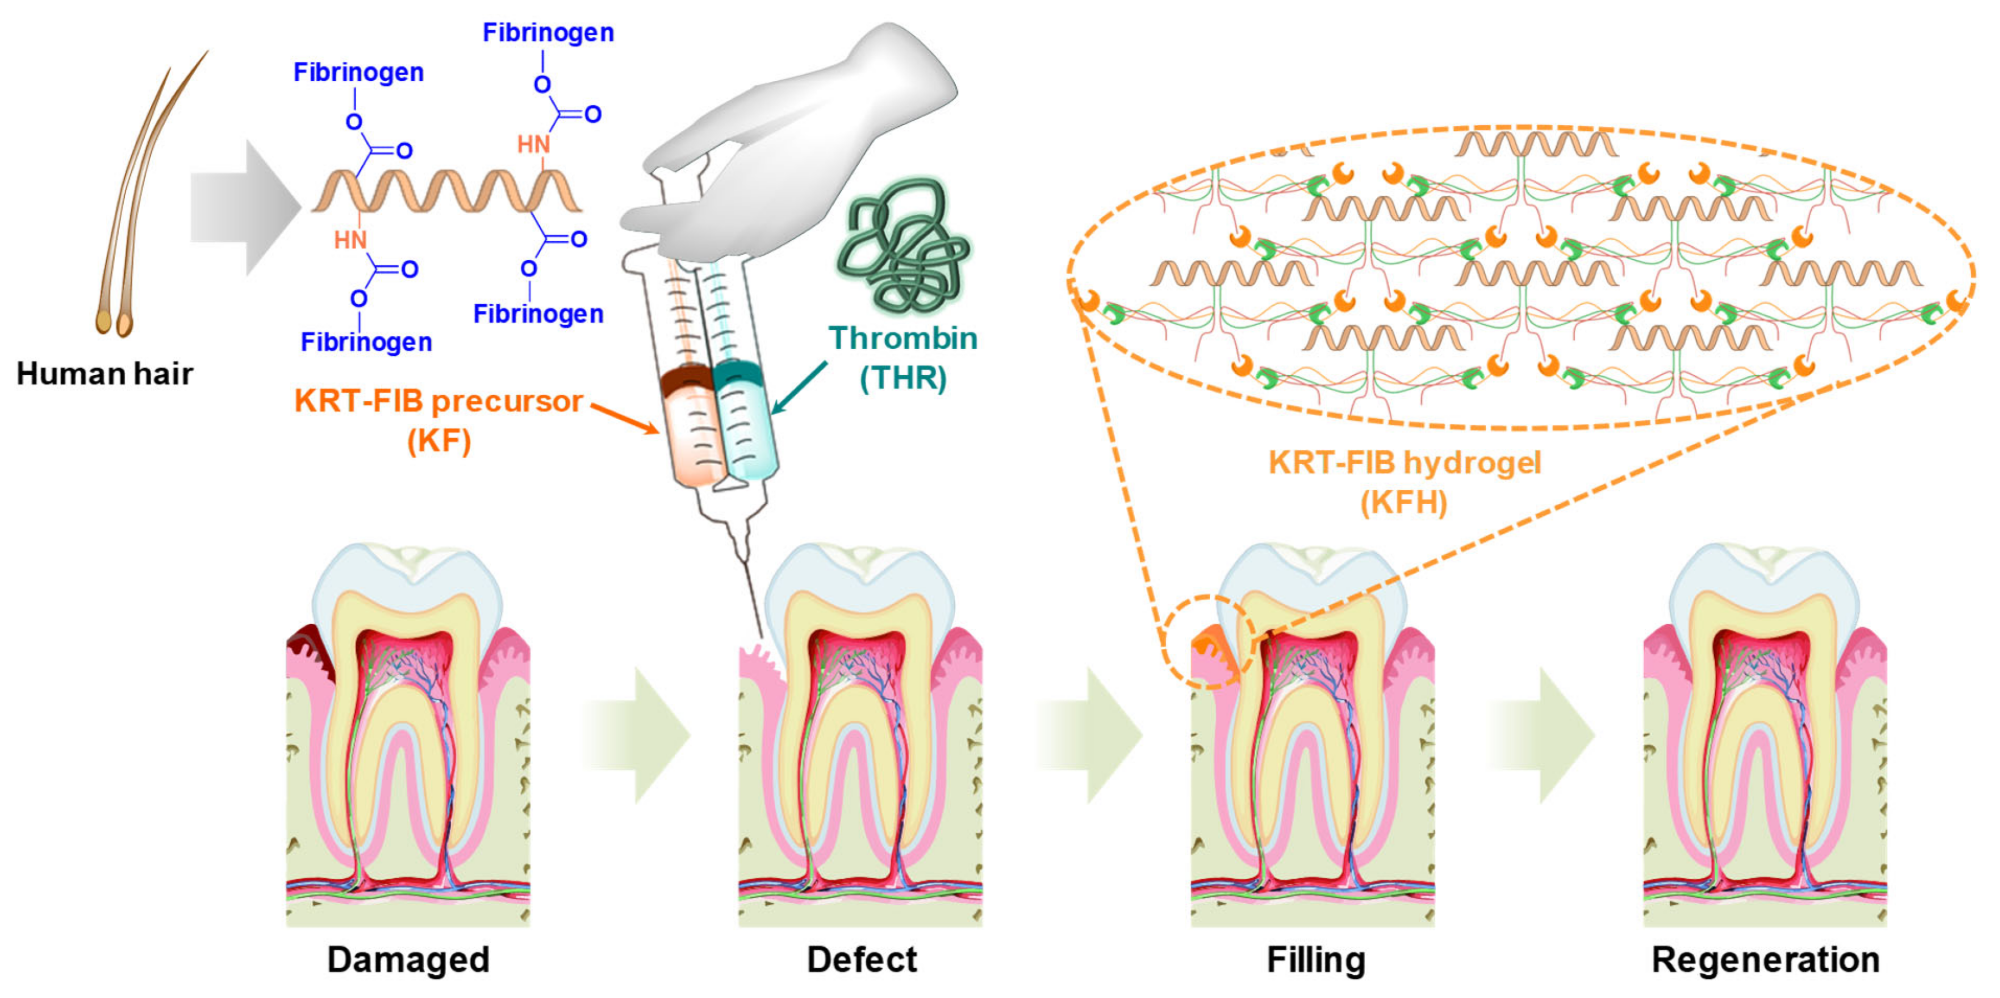 Keratin-Based Injectable Hydrogel to Promote Oral Tissue Regeneration